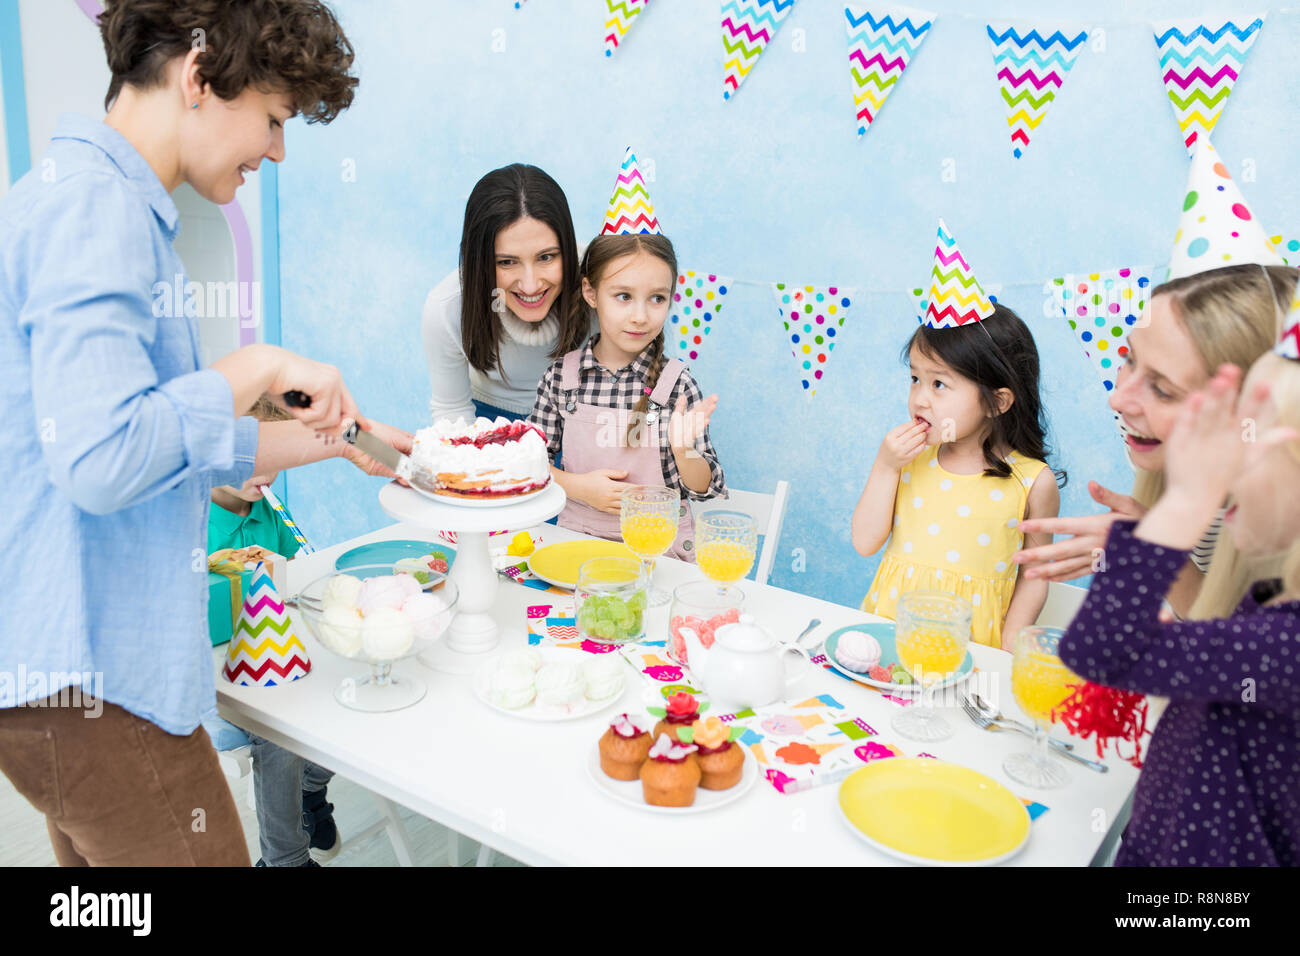 Mother cutting cake with knife for kids Stock Photo